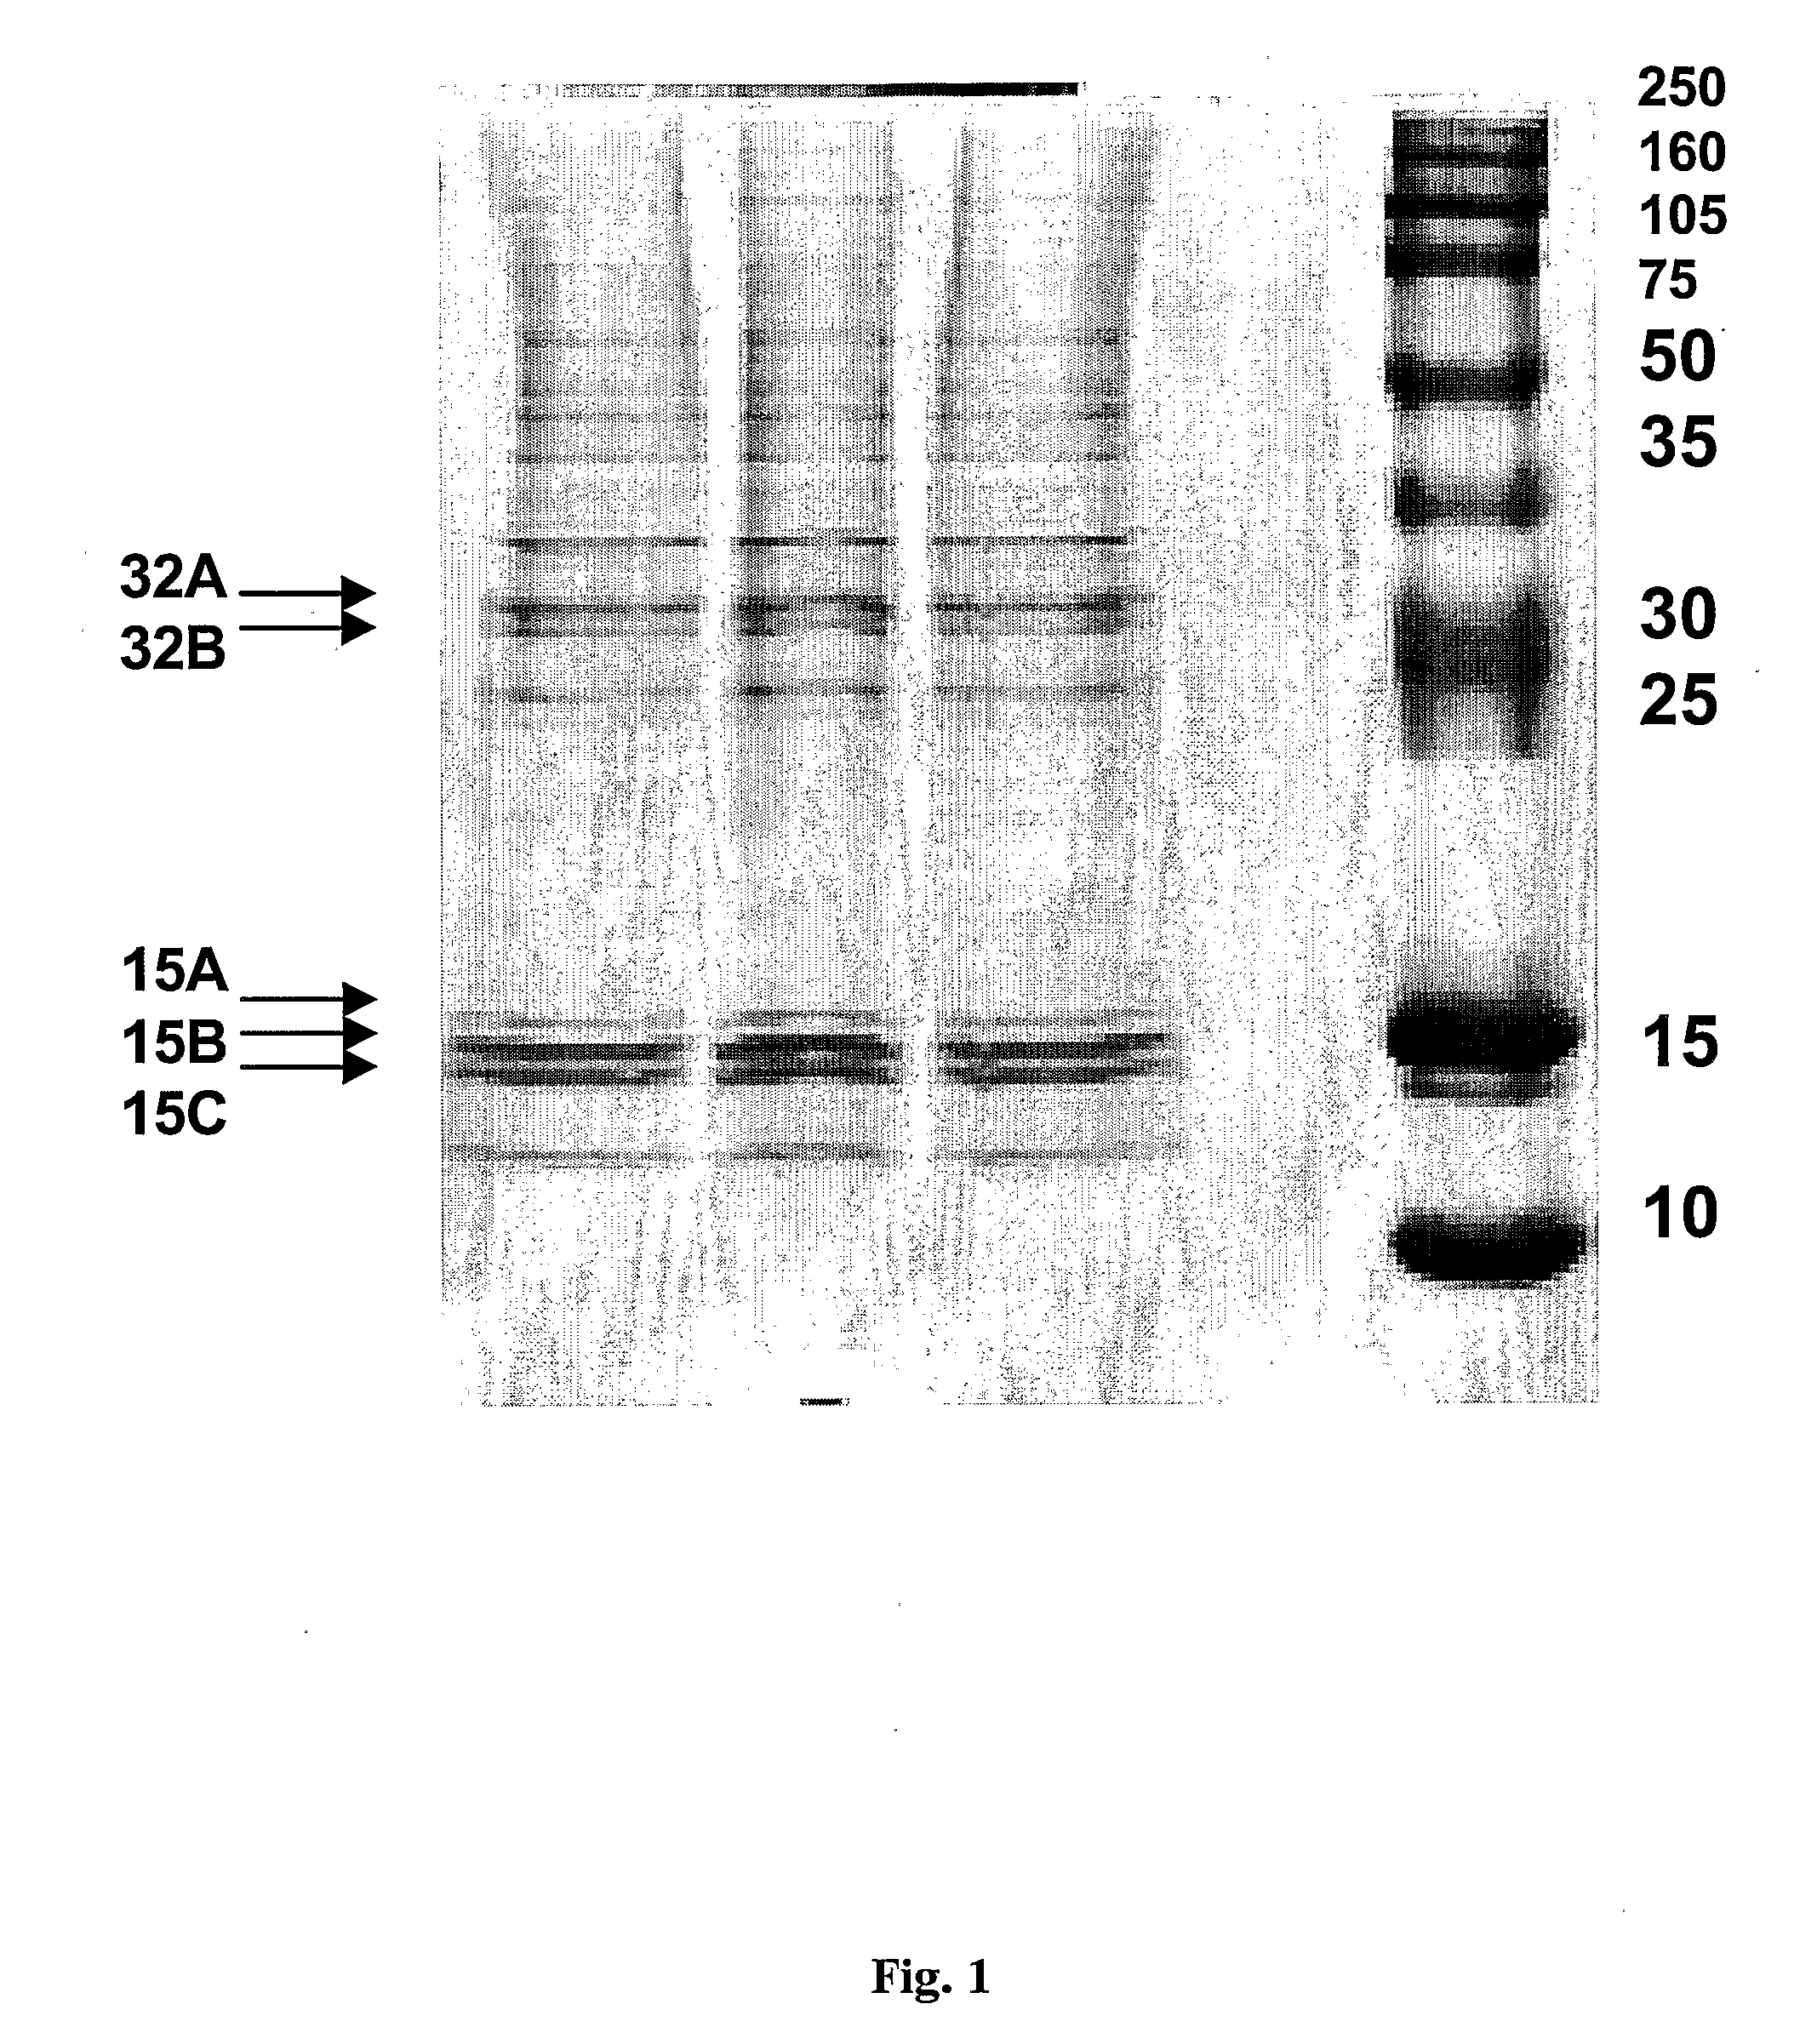 Sigma-2 Receptor, Method of Screening of Specific Ligands and Use of the Same in Diagnostic or Therapeutic Methods